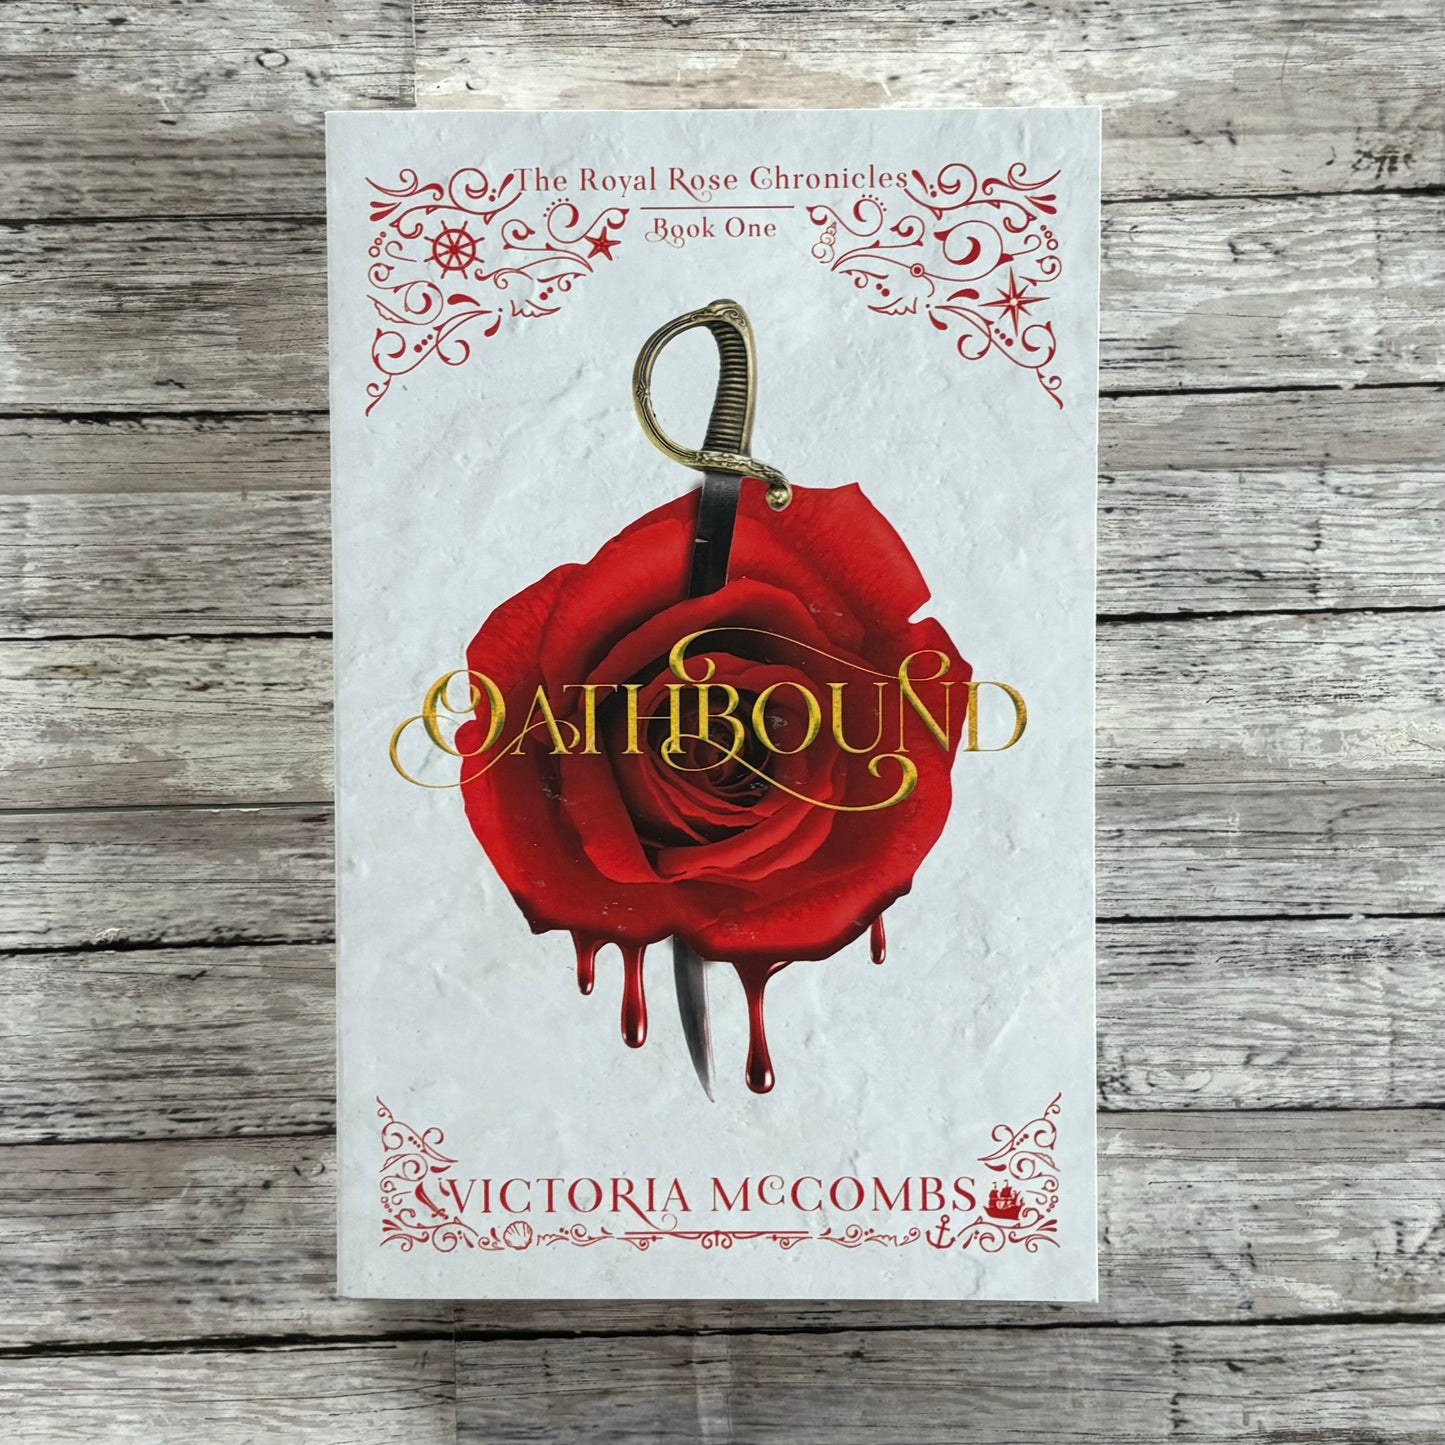 Oathbound by Victoria McCombs - Anchored Homeschool Resource Center